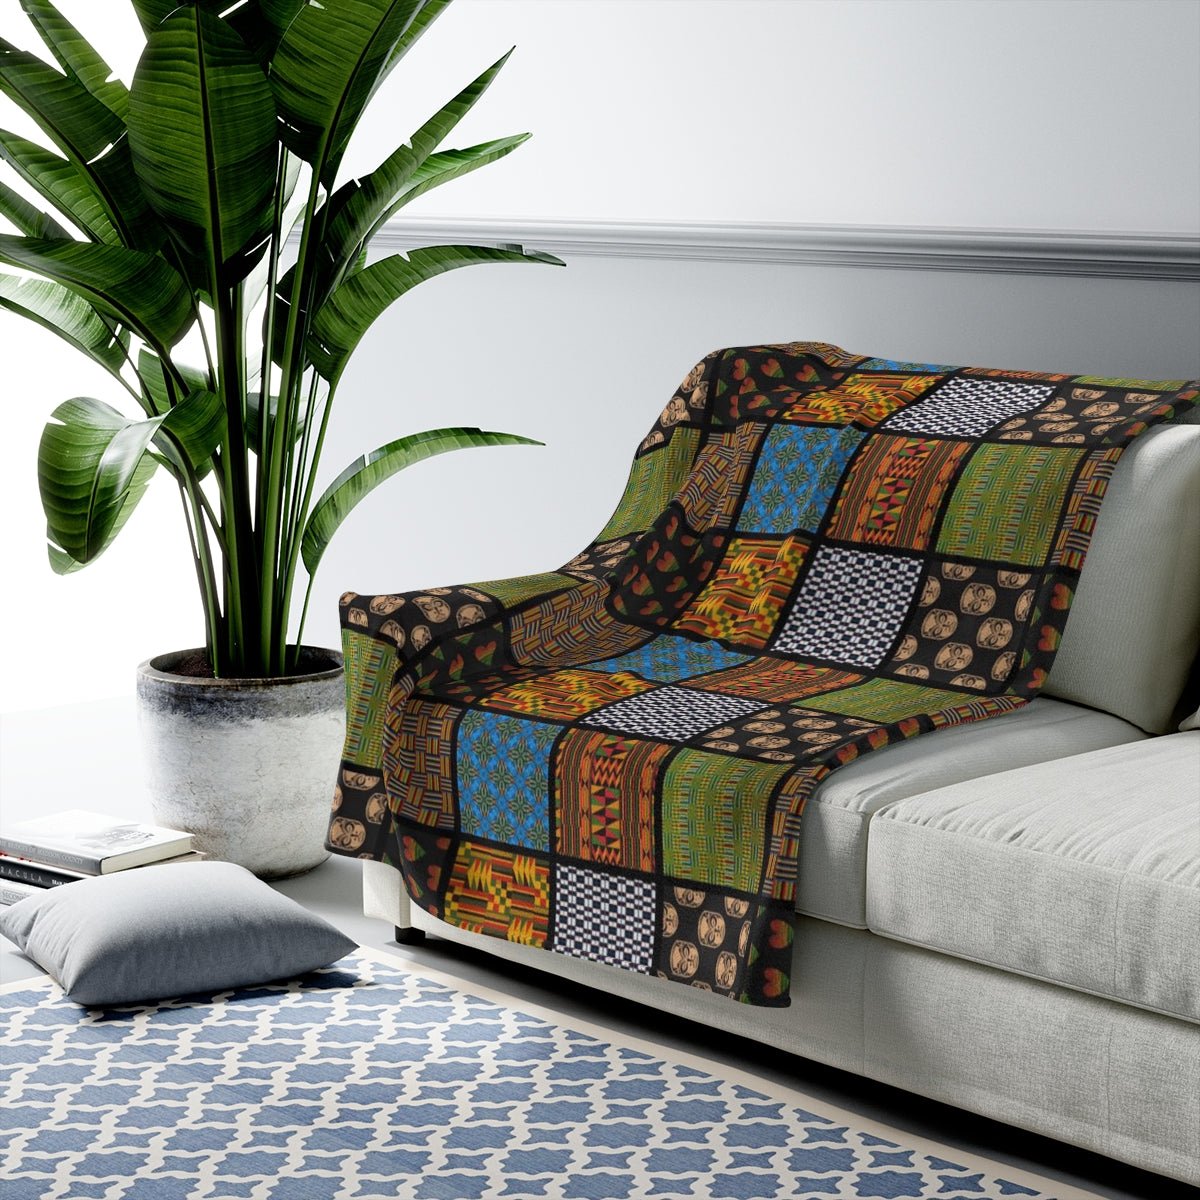 Afrocentric Quilt Style Blanket – The Trini Gee